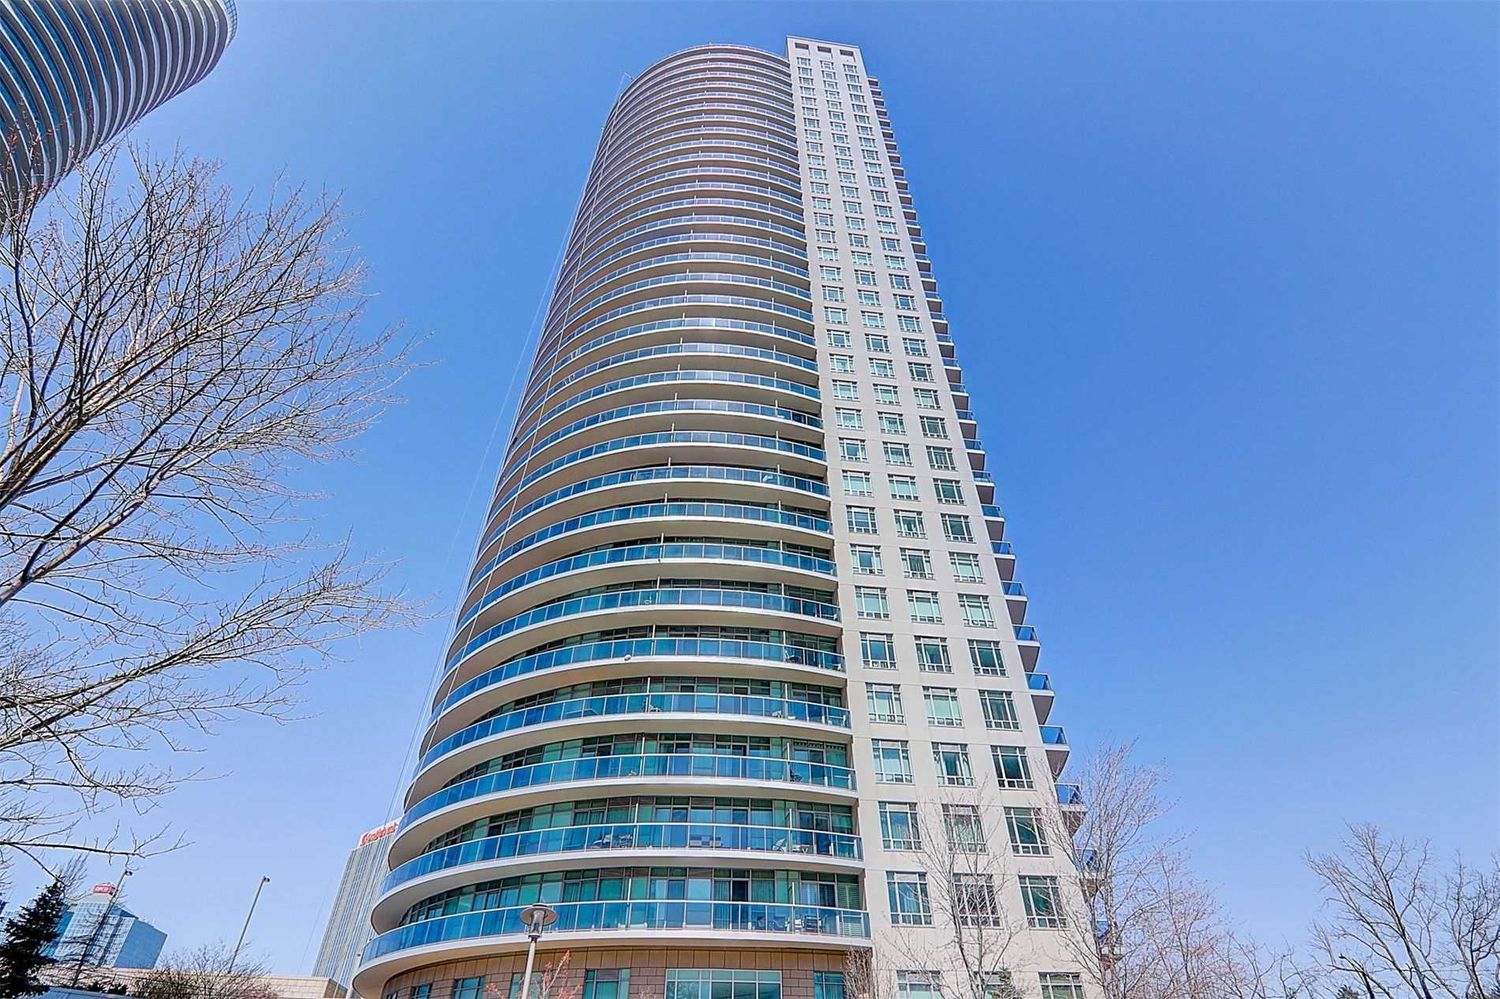 80 Absolute Avenue. Absolute Vision Condos is located in  Mississauga, Toronto - image #2 of 2